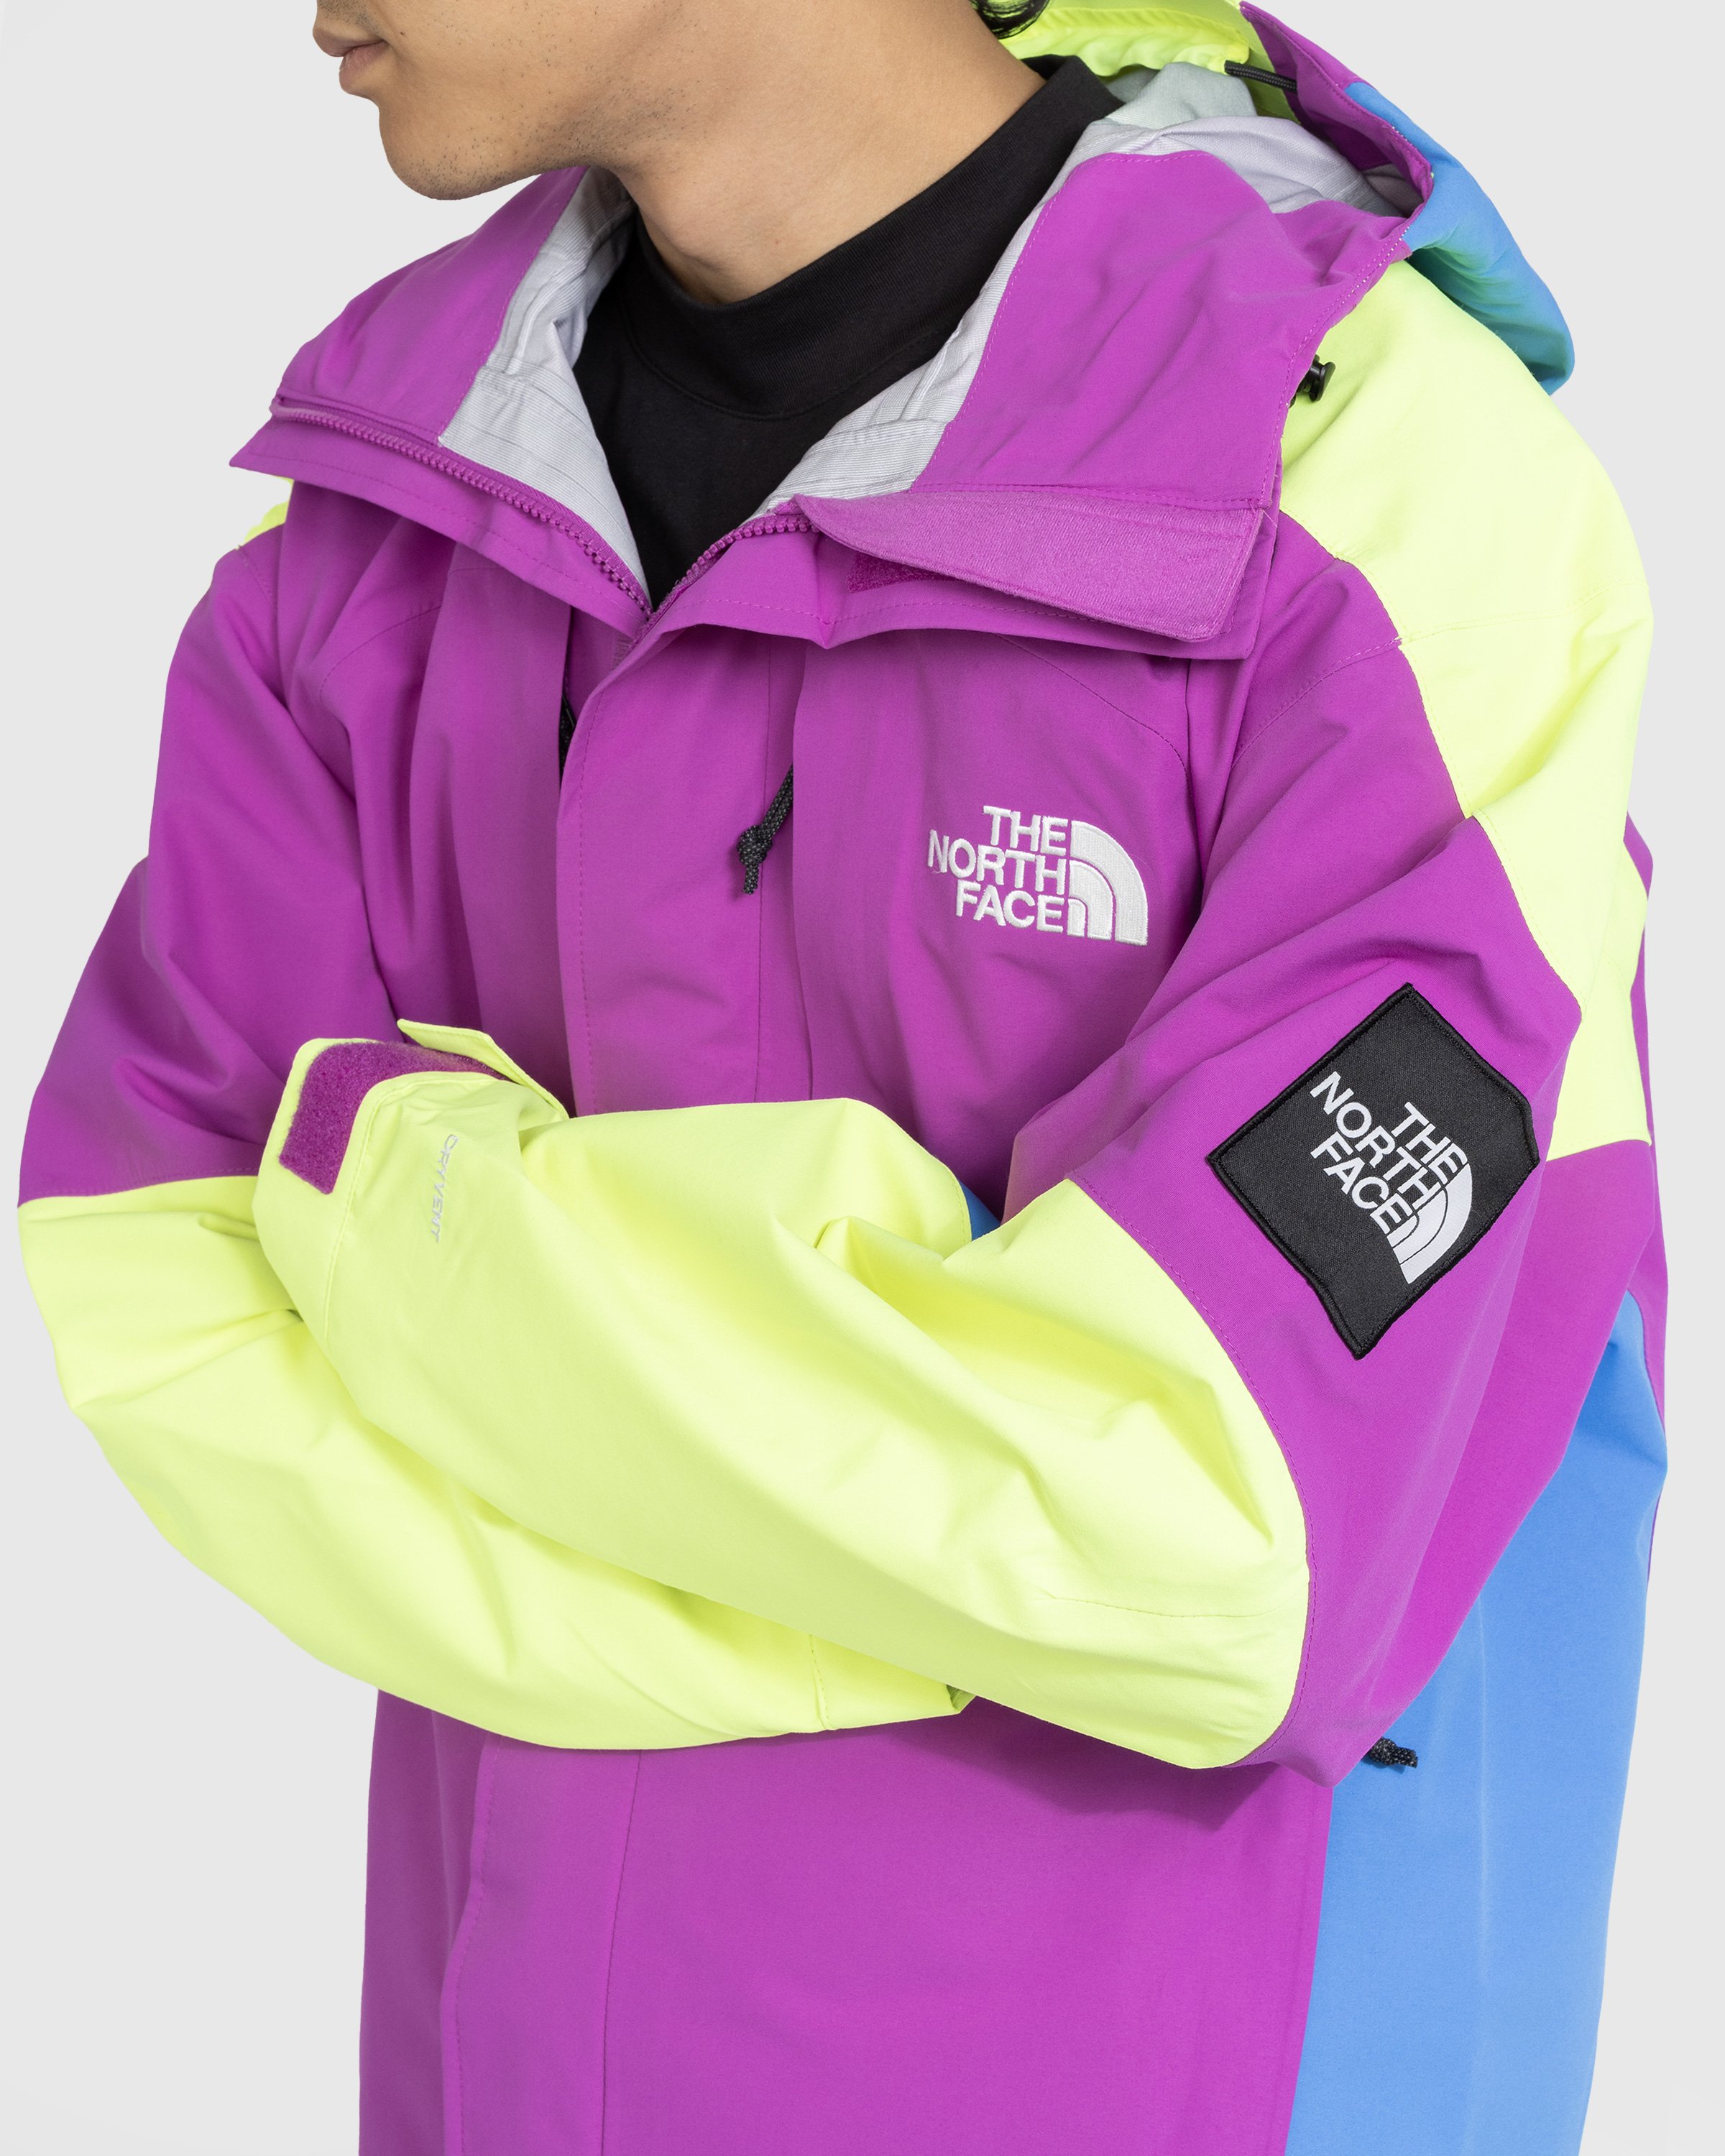 The North Face - 3L DryVent Carduelis Jacket Purple Cactus Flower/LED Yellow/Super Sonic Blue - Clothing - Multi - Image 4